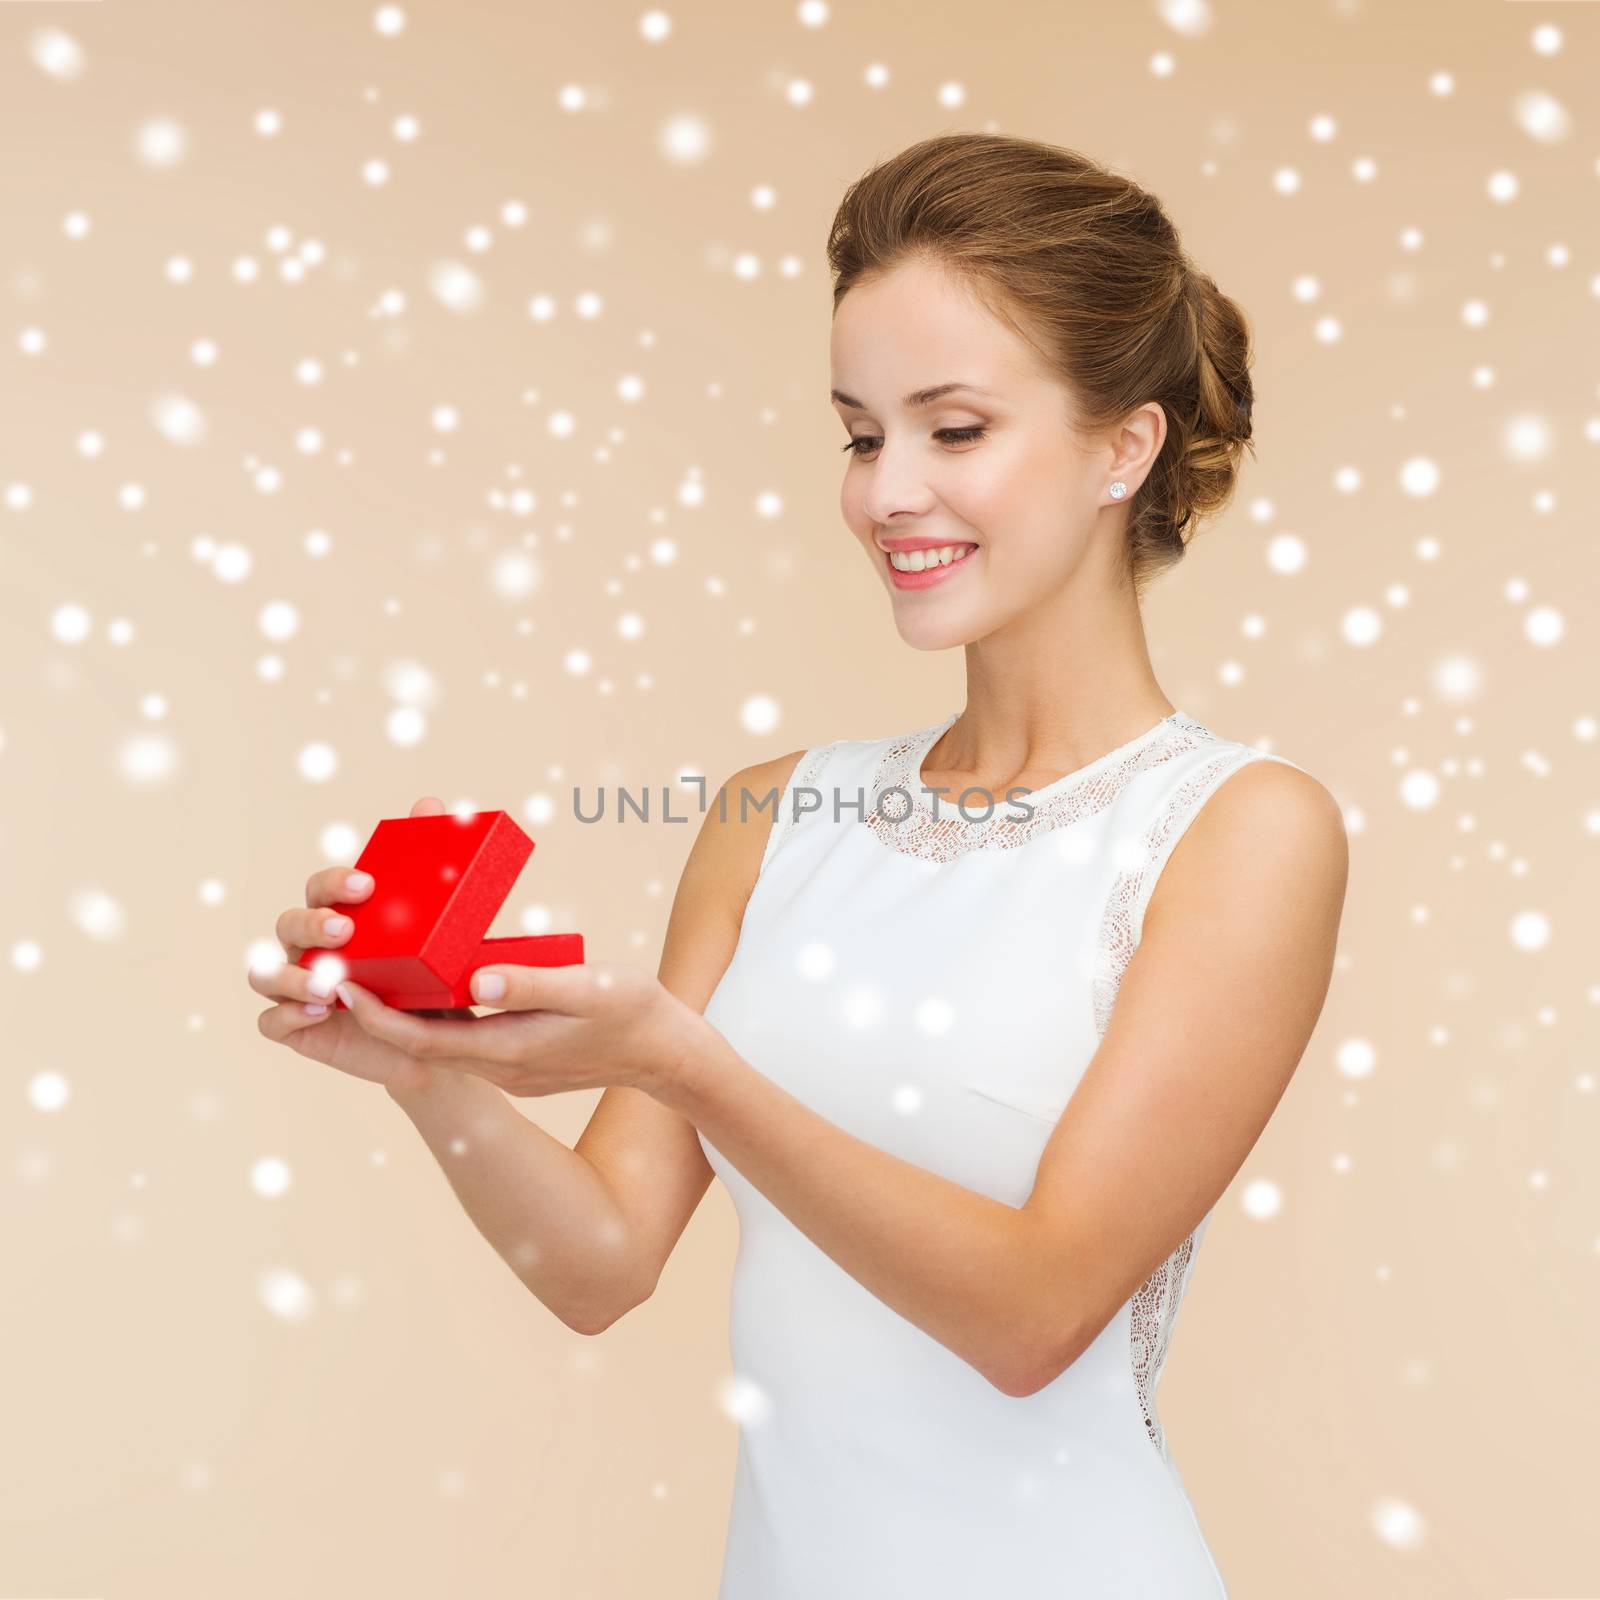 smiling woman holding red gift box by dolgachov